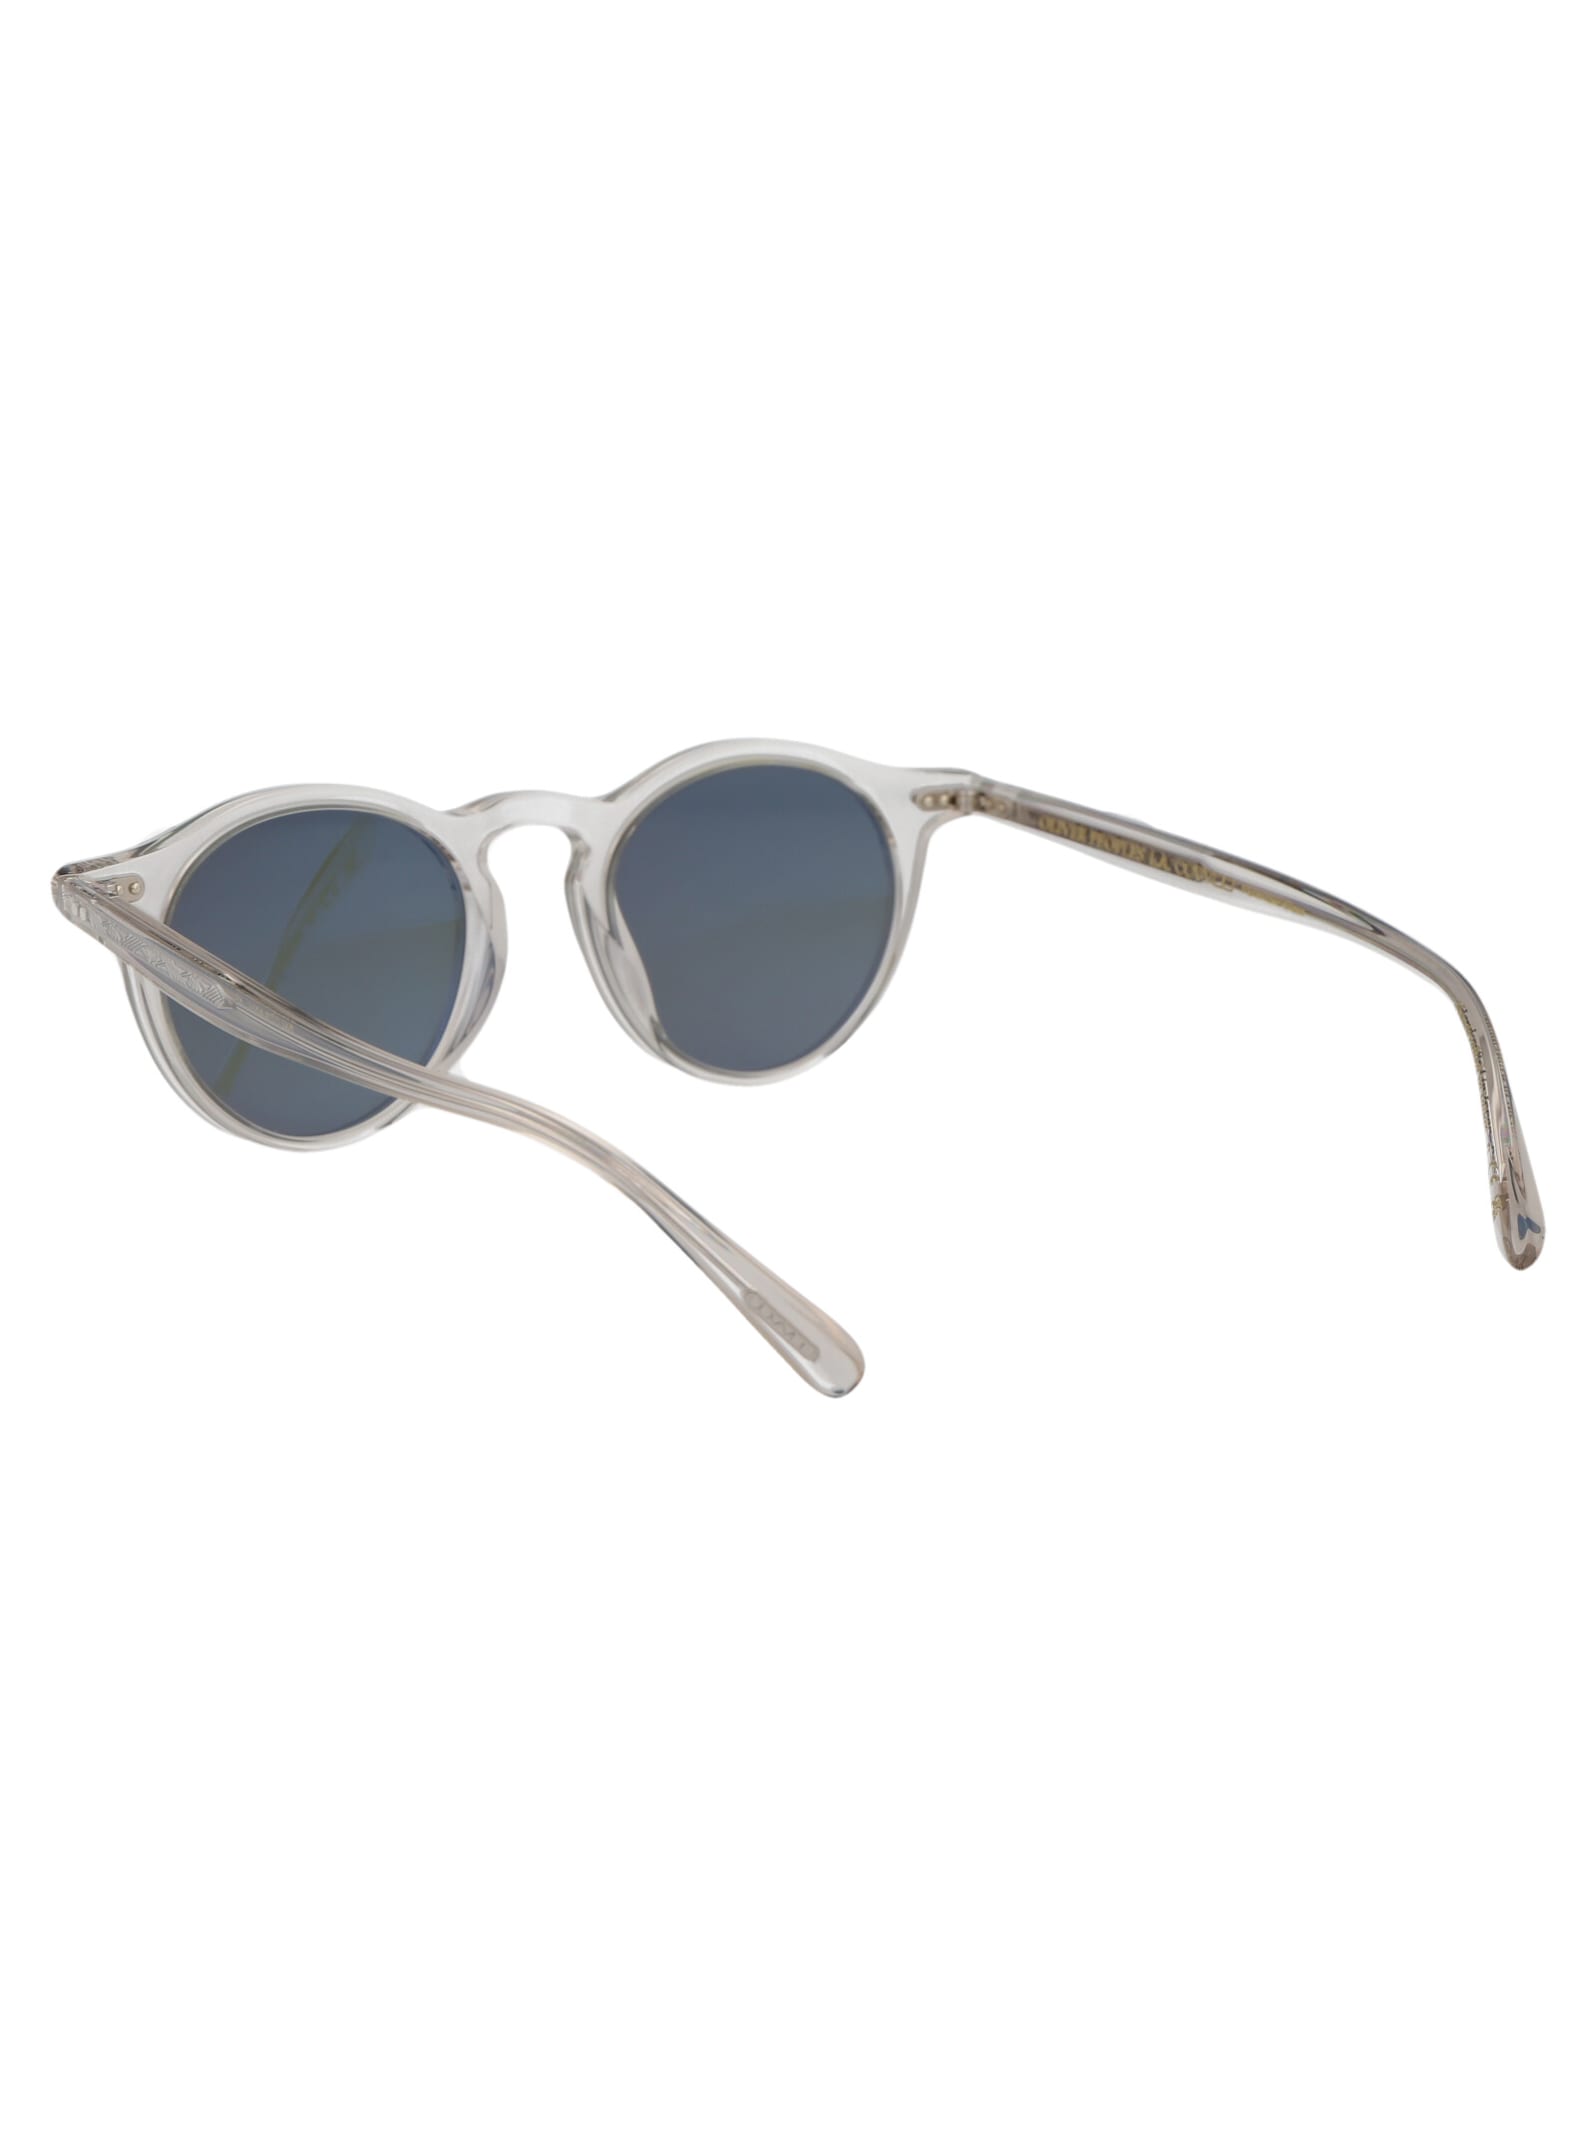 Shop Oliver Peoples Op-13 Sun Sunglasses In 1757p1 Gravel